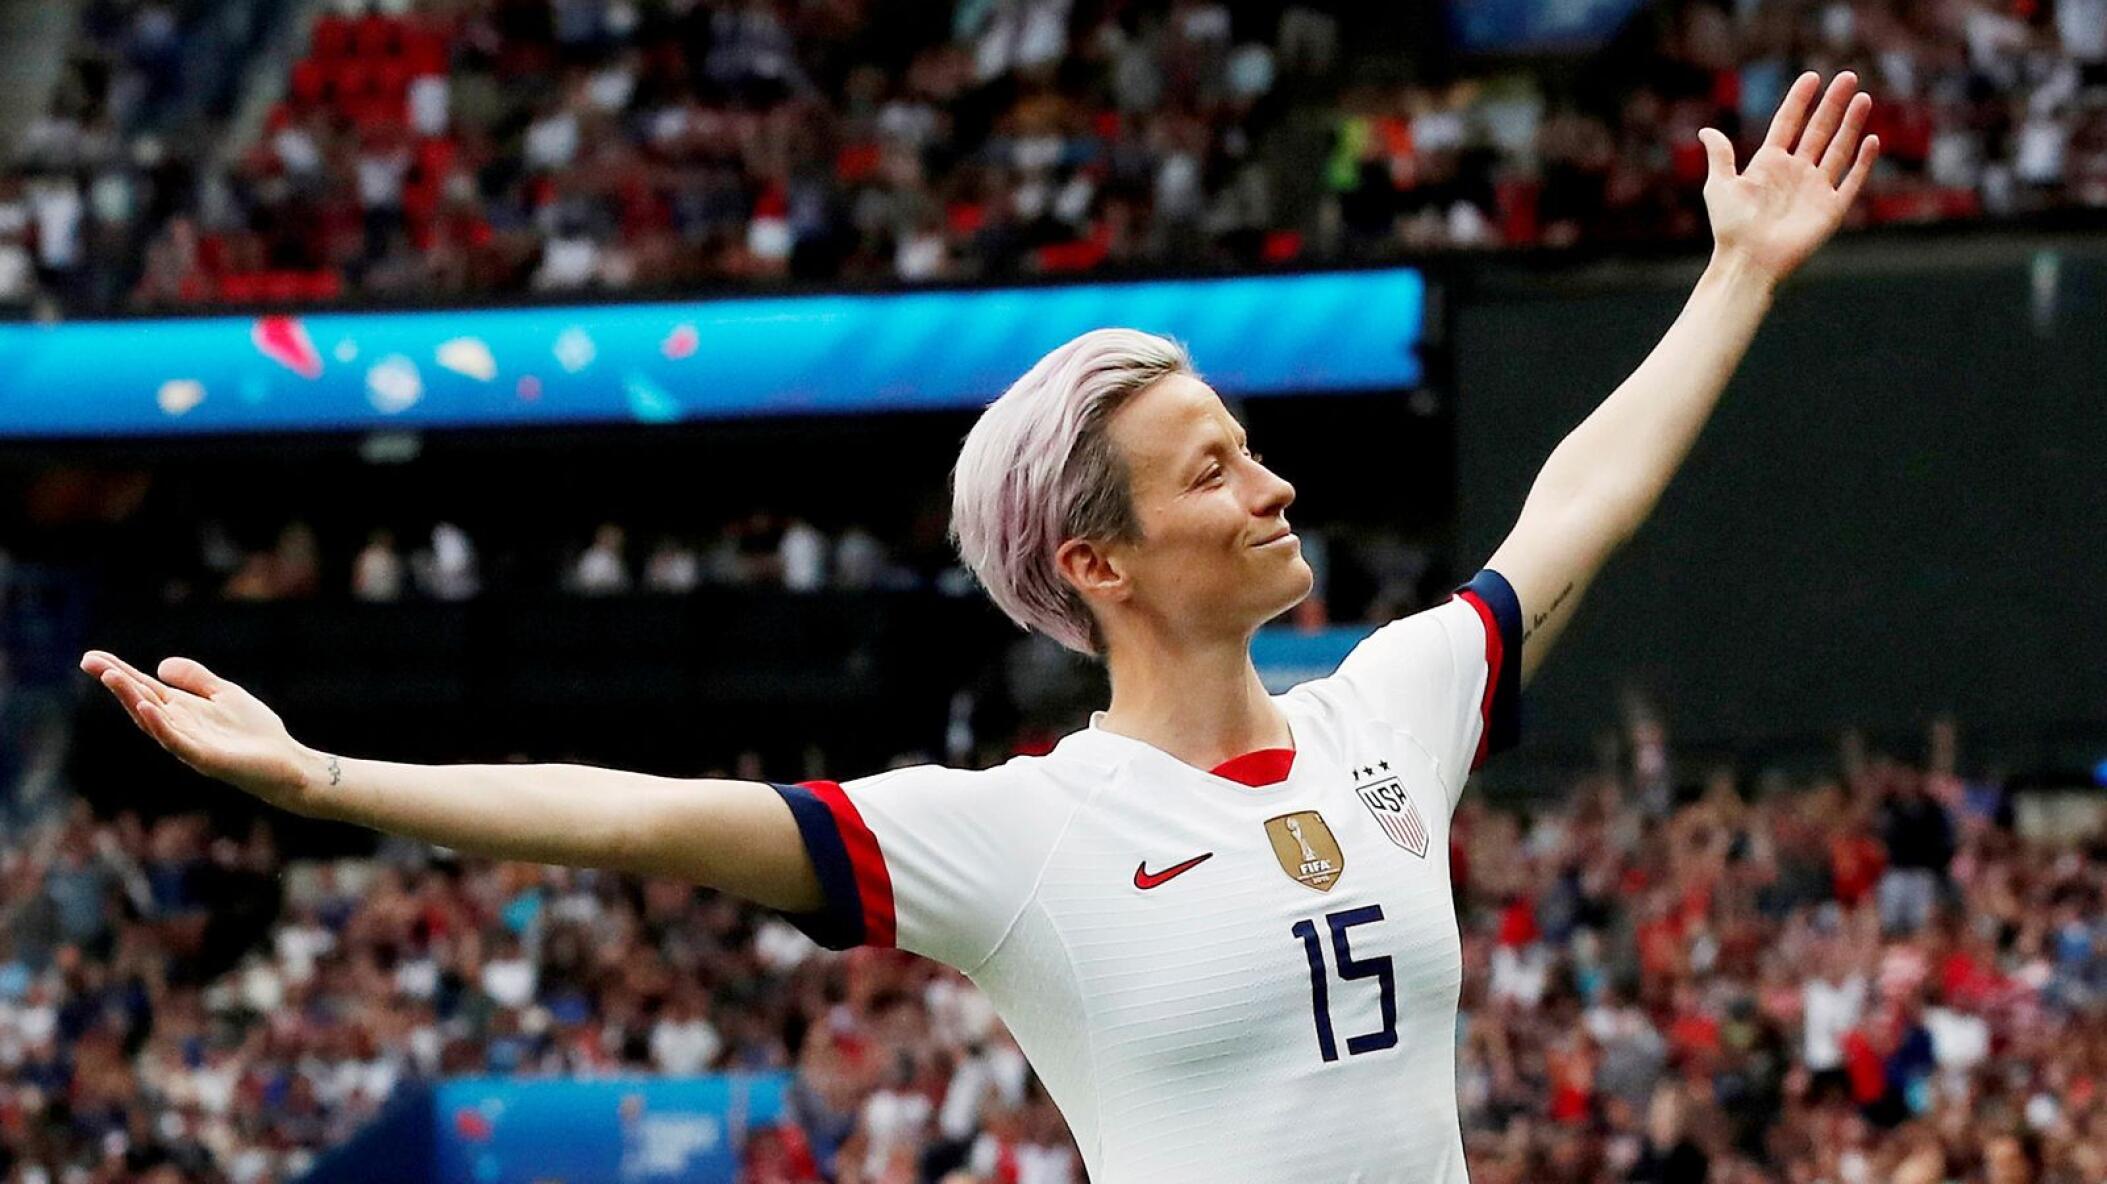 Women’s soccer icon Megan Rapinoe will play her last game for the United States when they take on Banyana Banyana in a friendly in Chicago on September 24